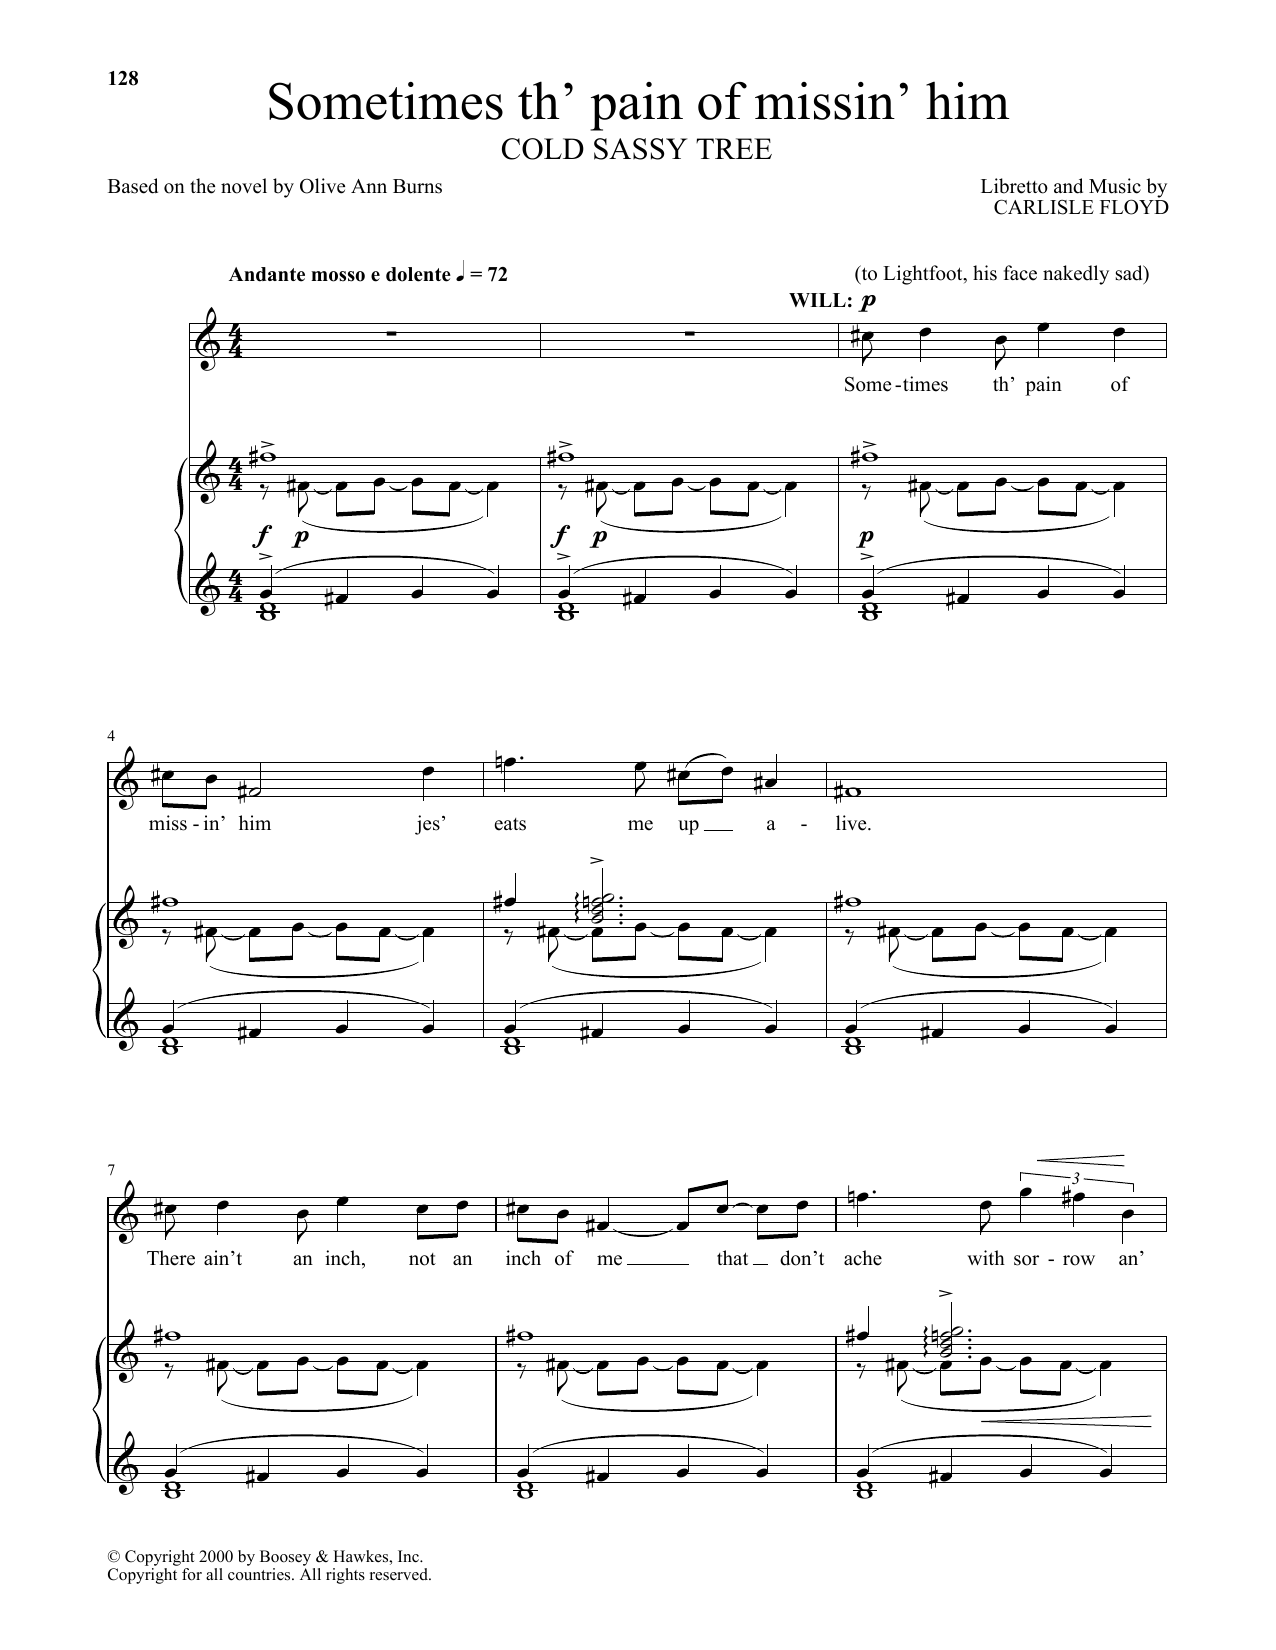 Download Carlisle Floyd Sometimes th' pain of missin' him (from Sheet Music